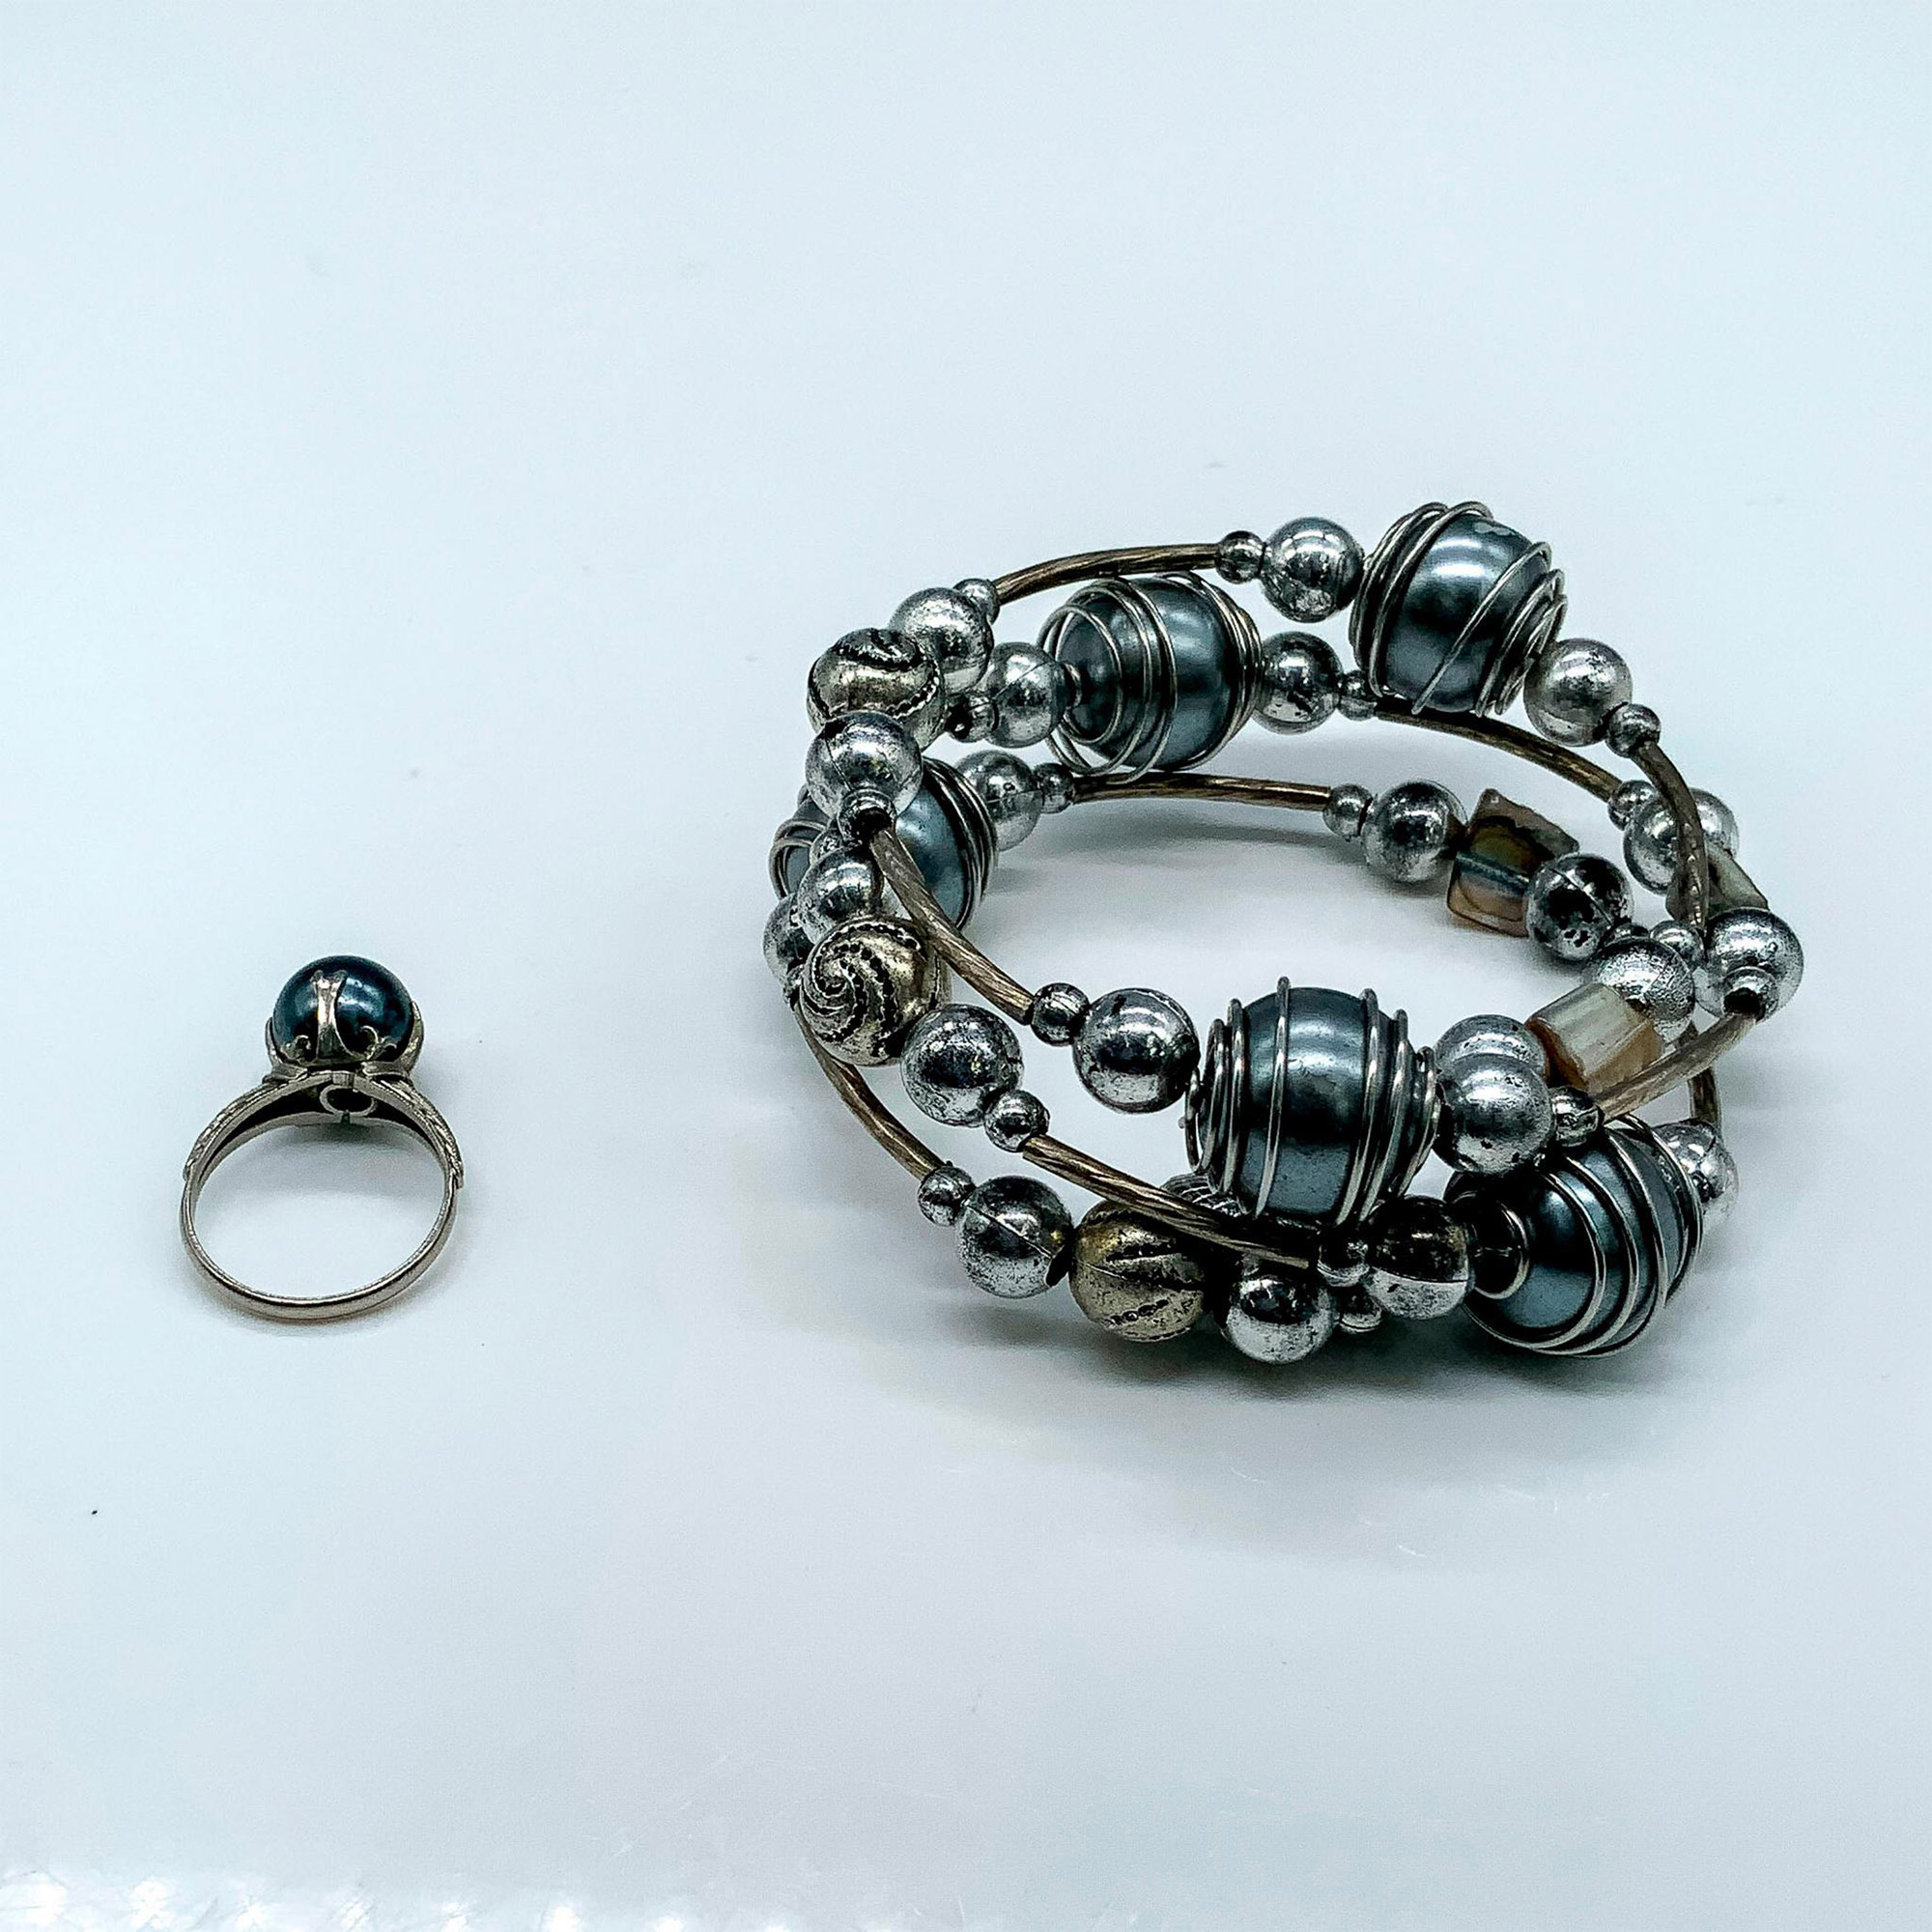 4pc Silver and Blue Faux Pearl Ring & Bracelet - Image 4 of 4